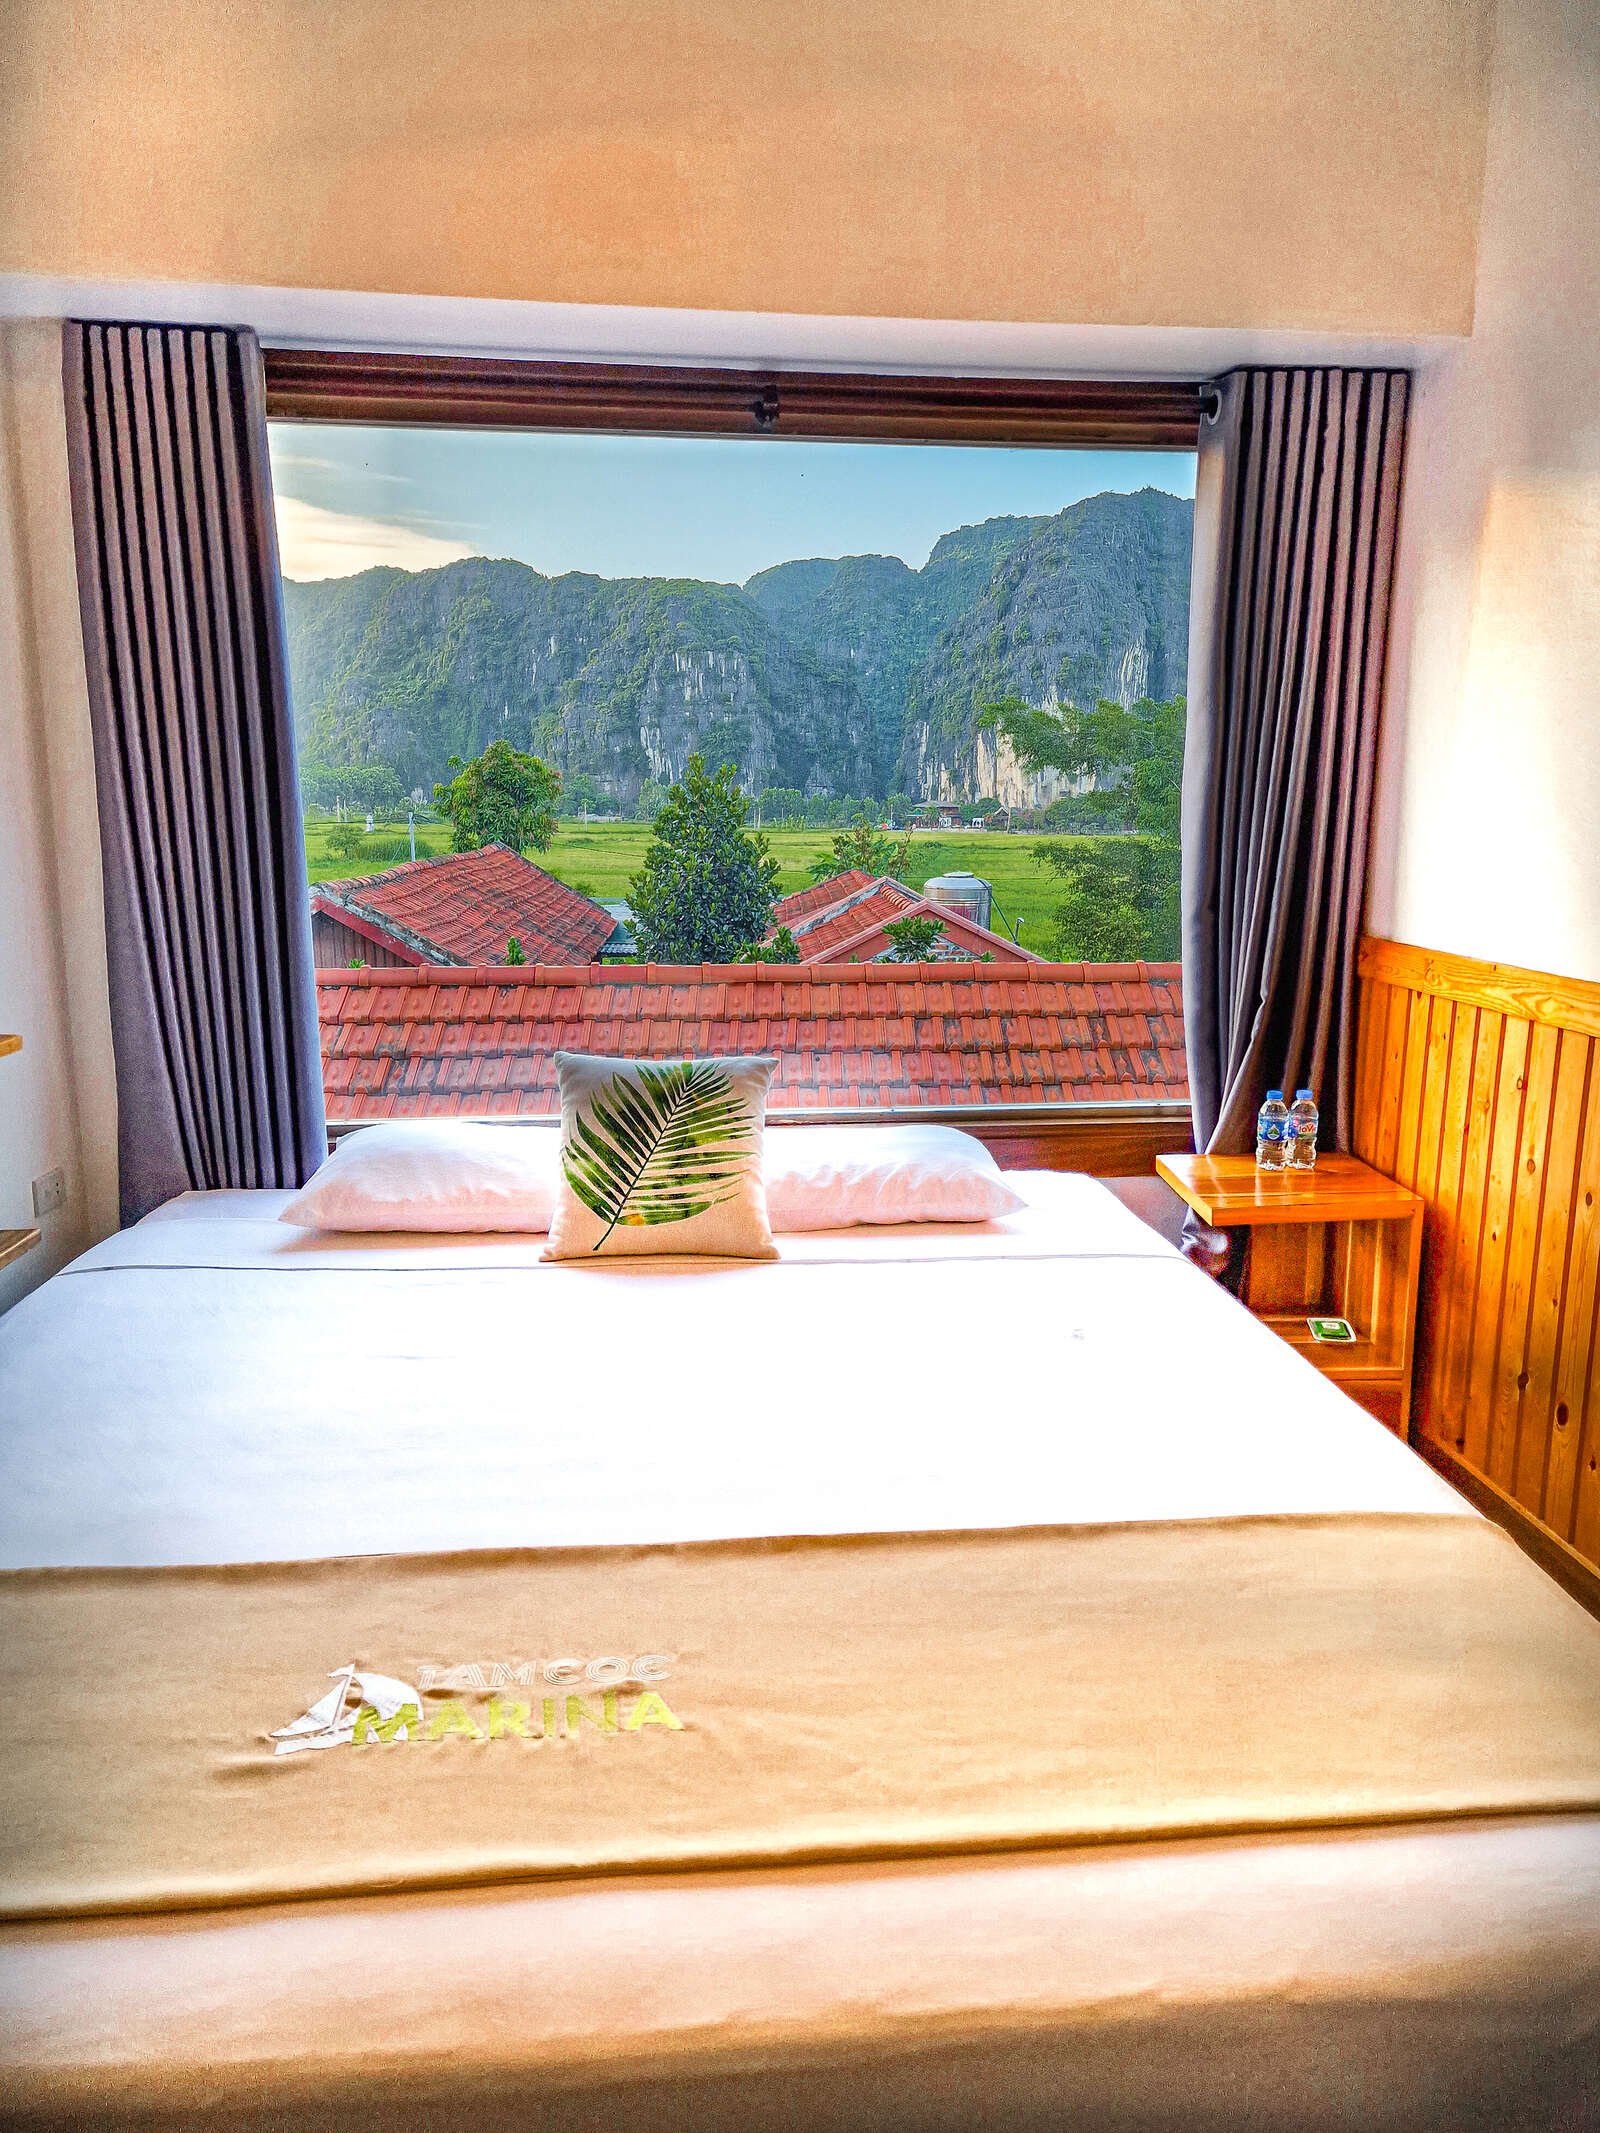 a bed in a hotel room below a window with a mountain view outside